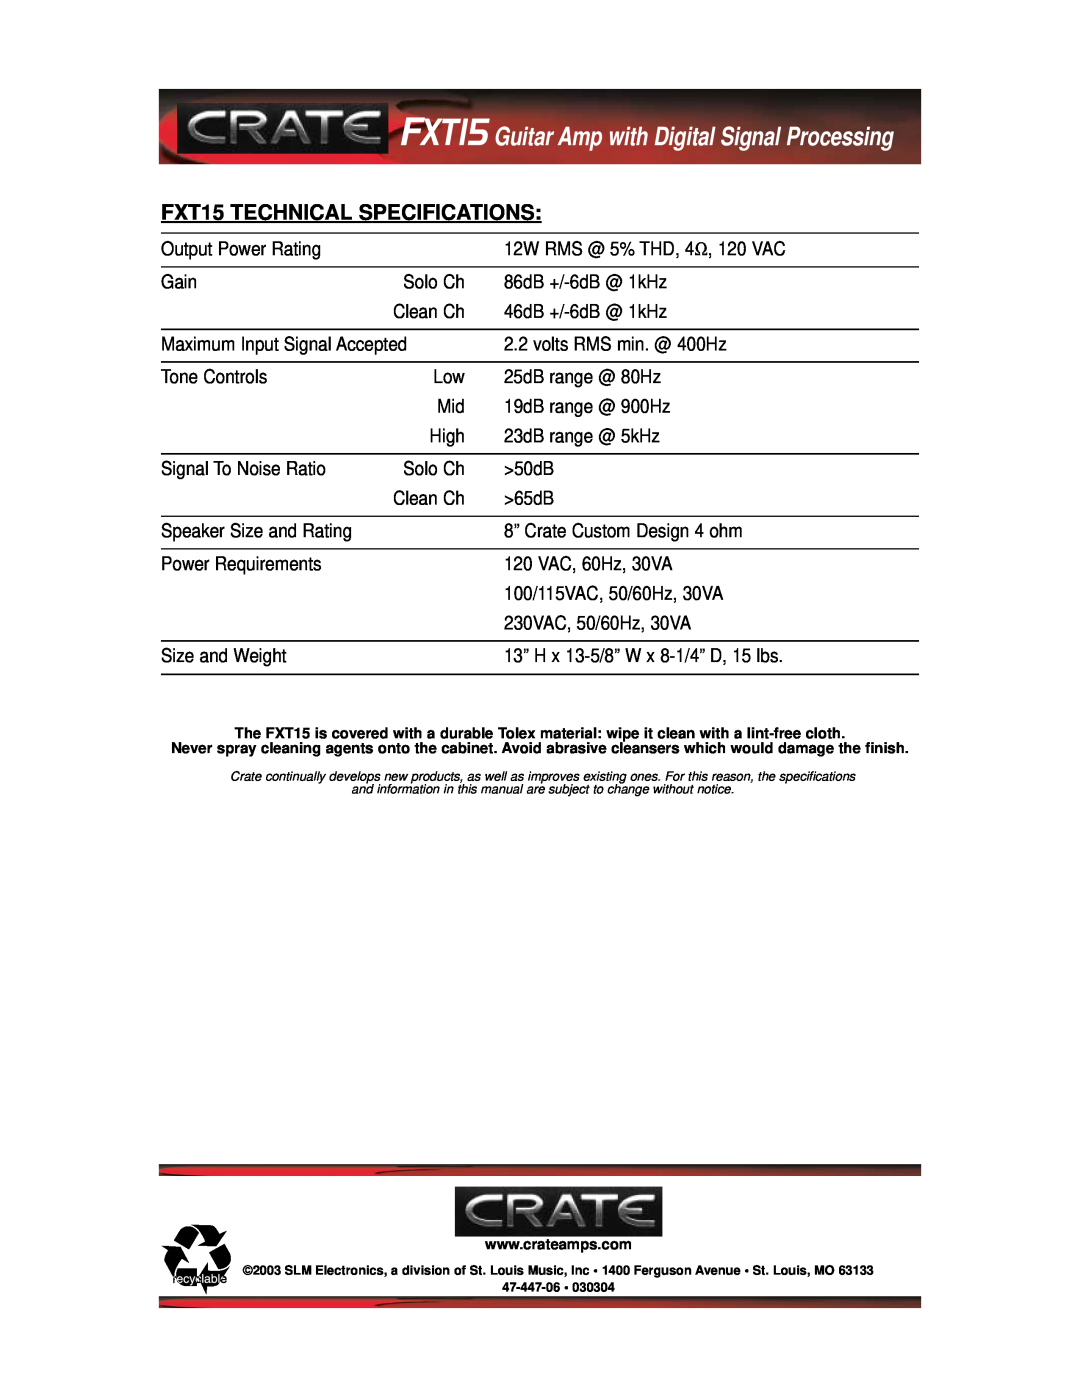 Crate Amplifiers manual FXT15 TECHNICAL SPECIFICATIONS, FXT15 Guitar Amp with Digital Signal Processing 